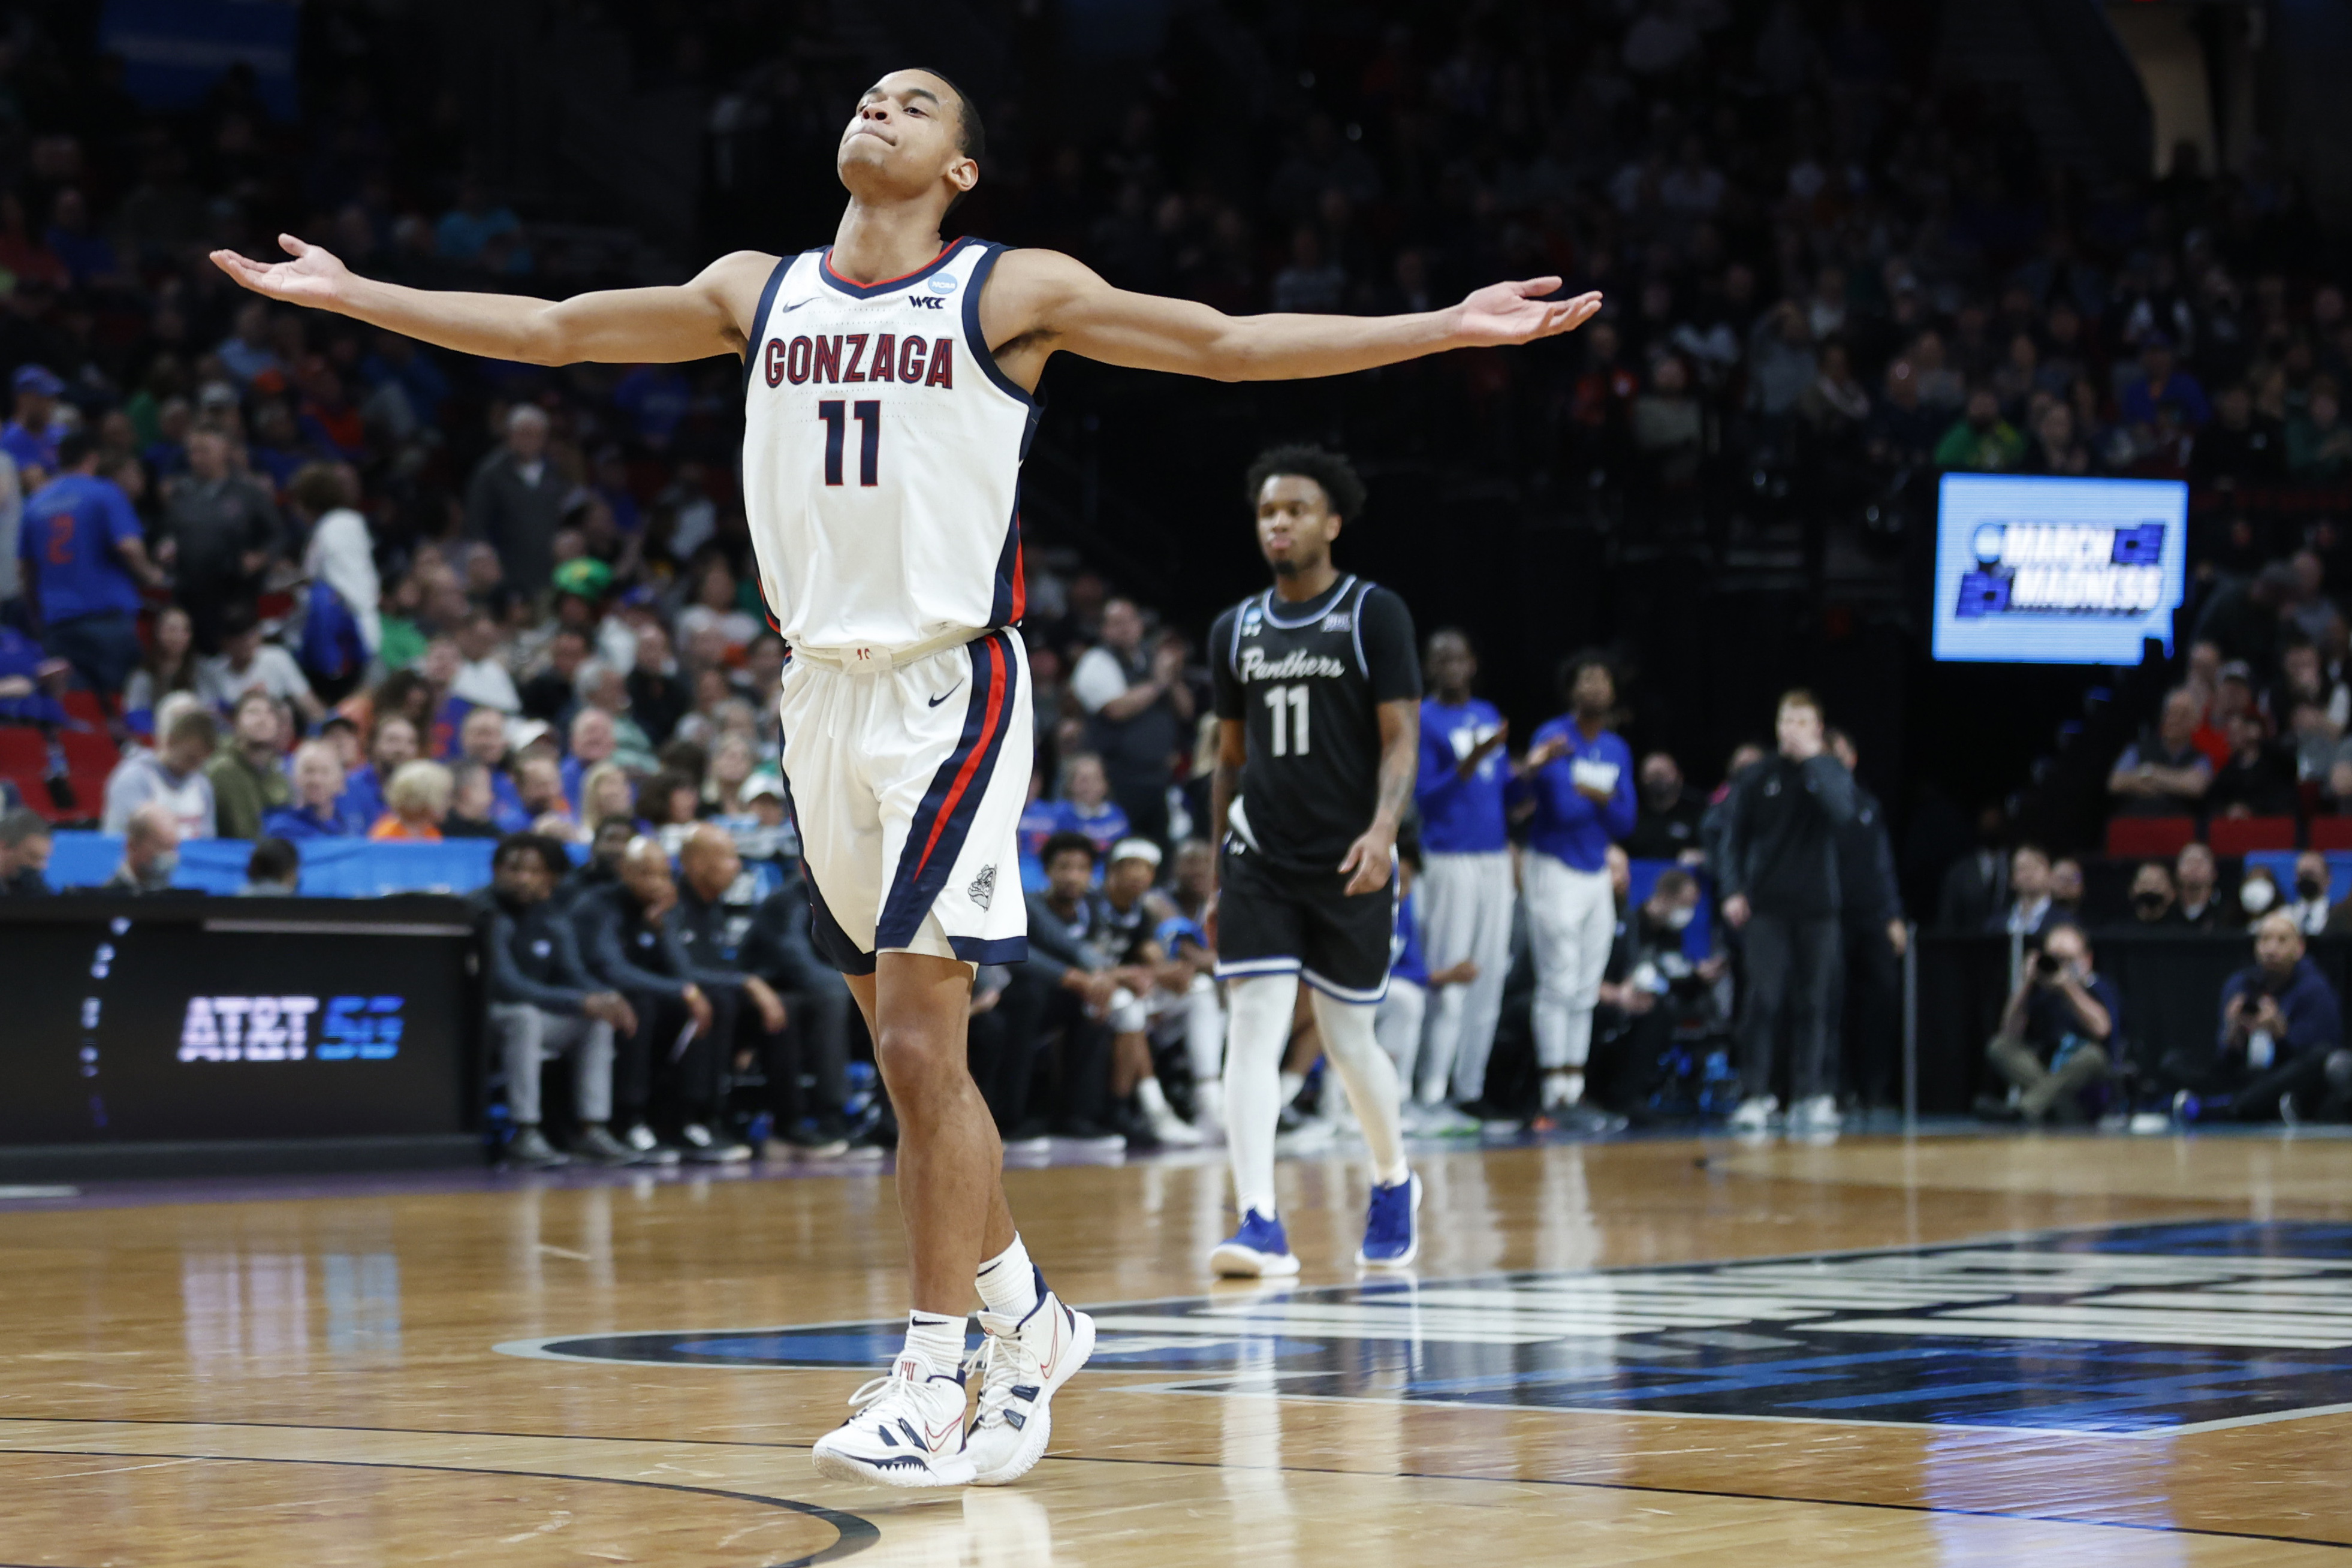 Gonzaga-Memphis live stream (3/19) How to watch NCAA tournament online, TV, time